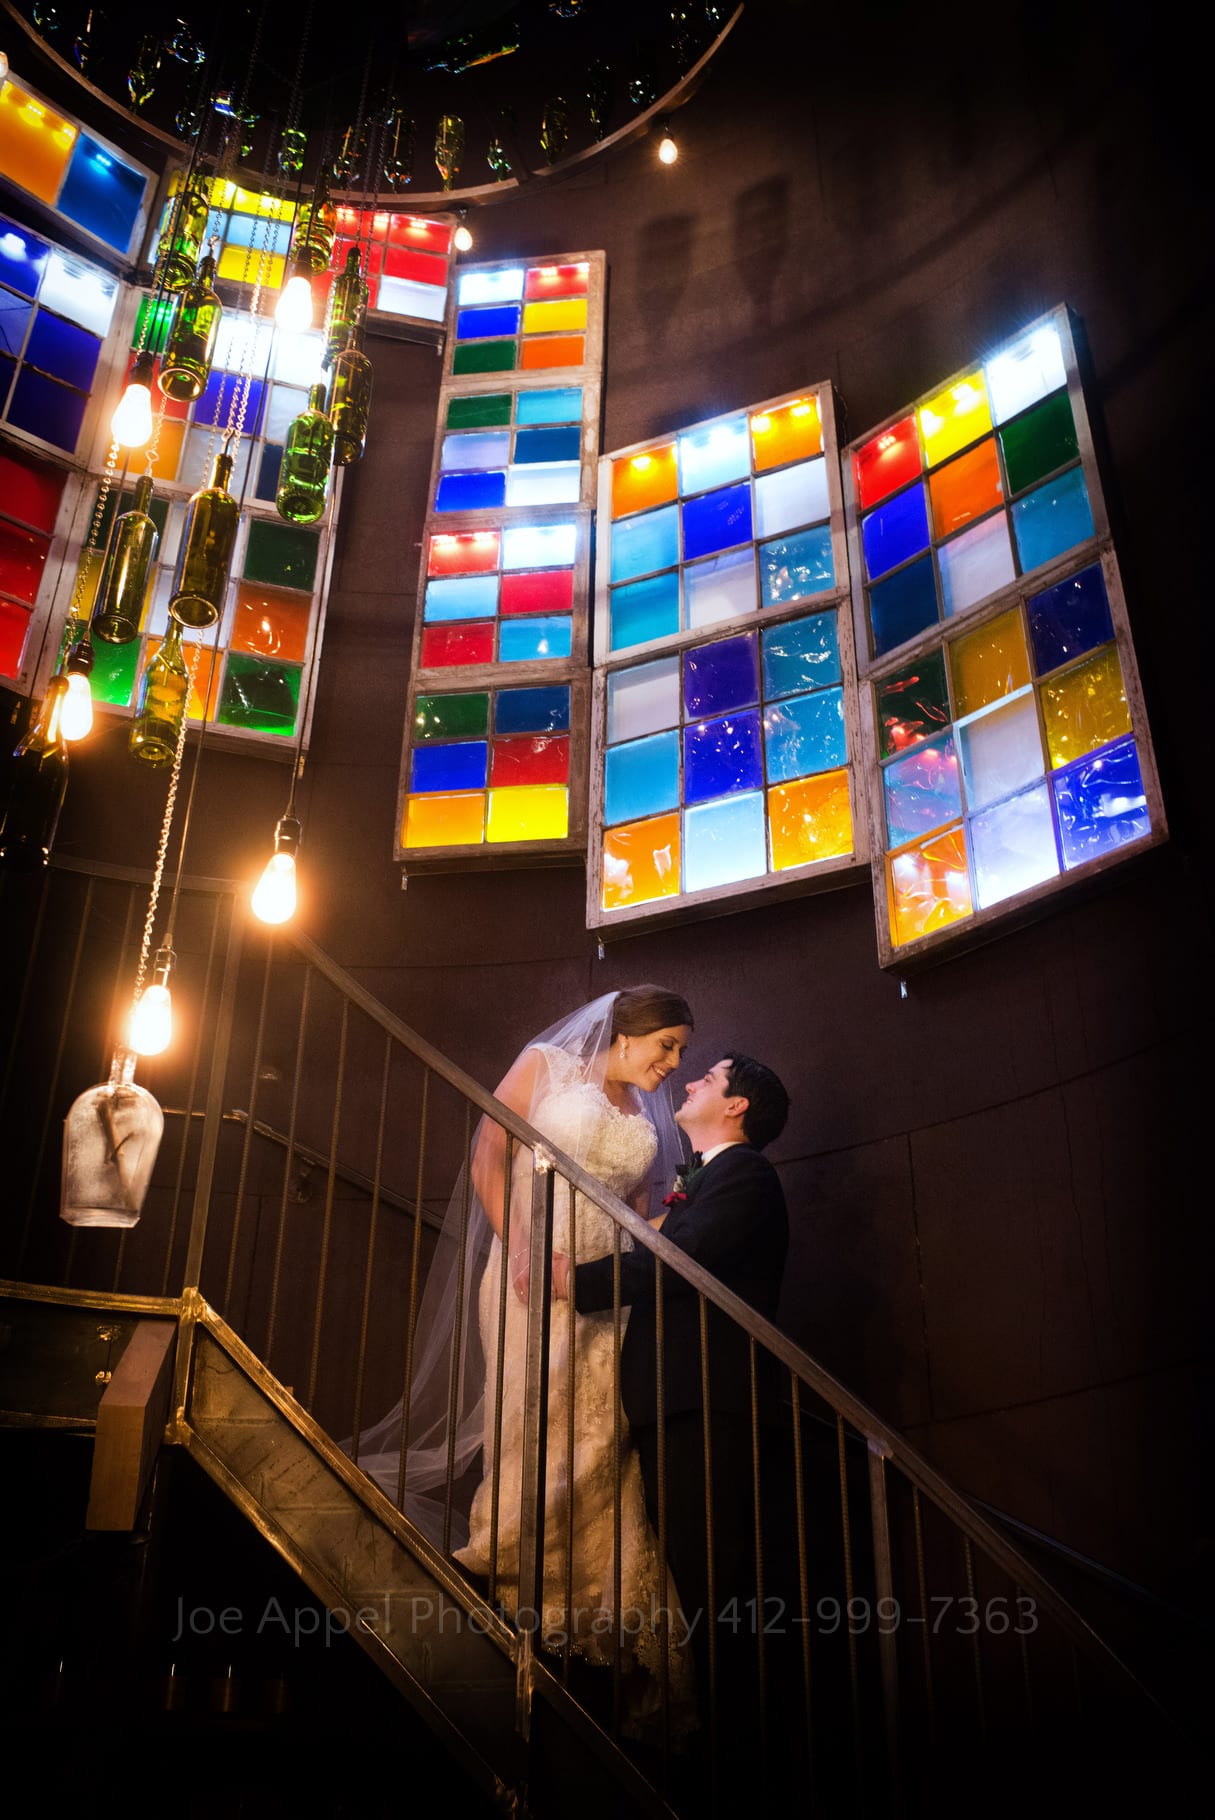 on stairs beneath colored glass windows a bride and groom look at each other